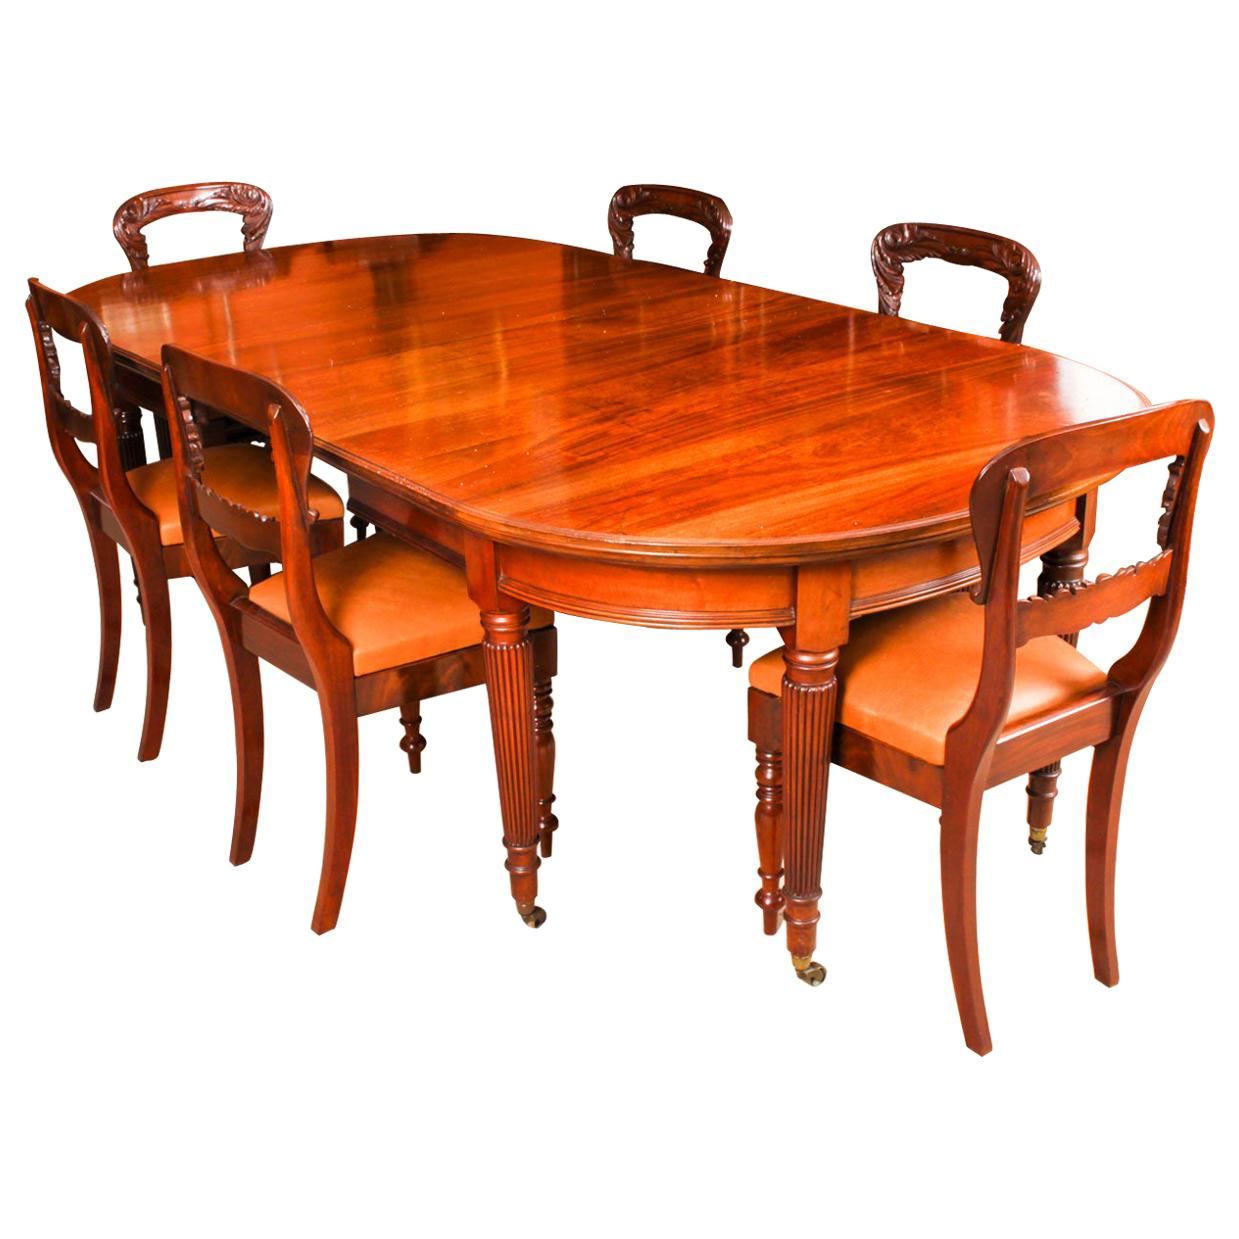 Antique Victorian Oval Extending Dining Table & 6 Chairs, 19th Century